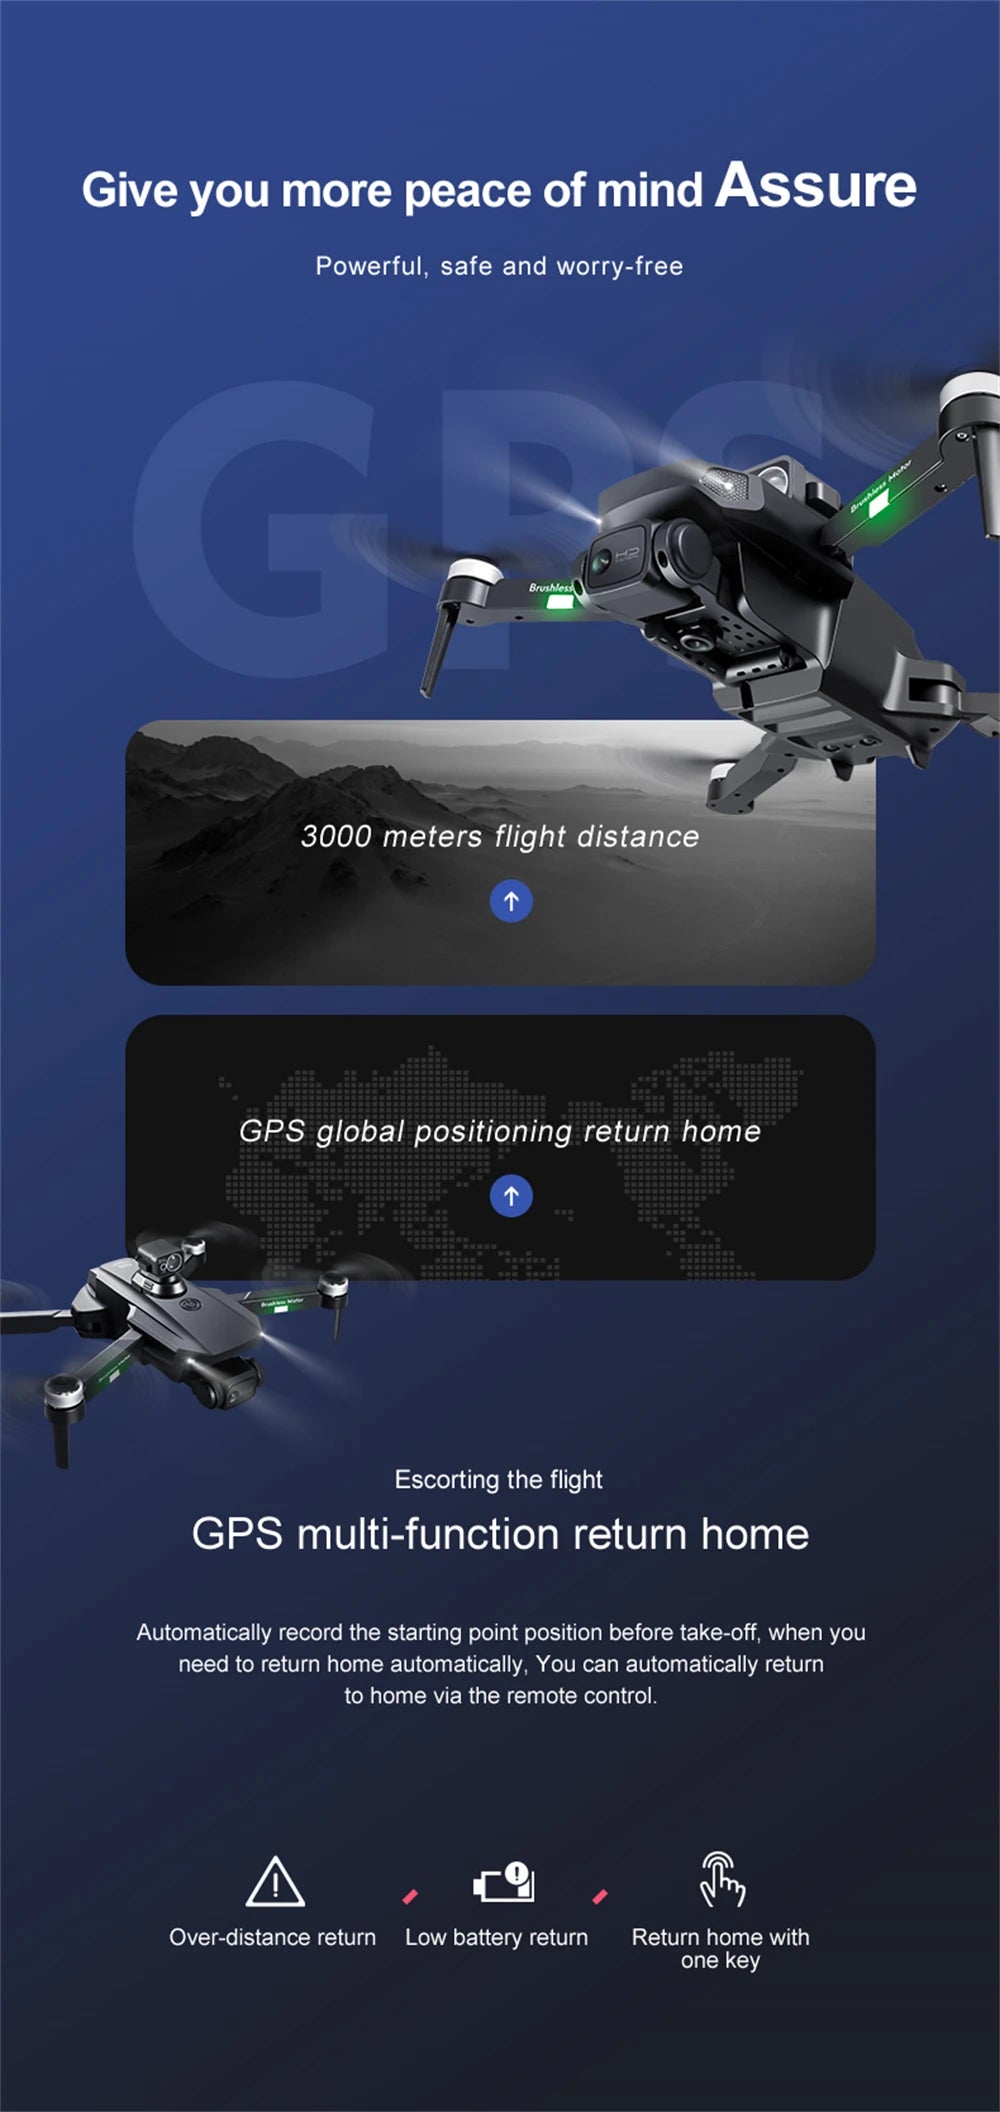 RG101 MAX Drone, GT Brukk 3000 meters flight distance return home Automatically record the starting point position before